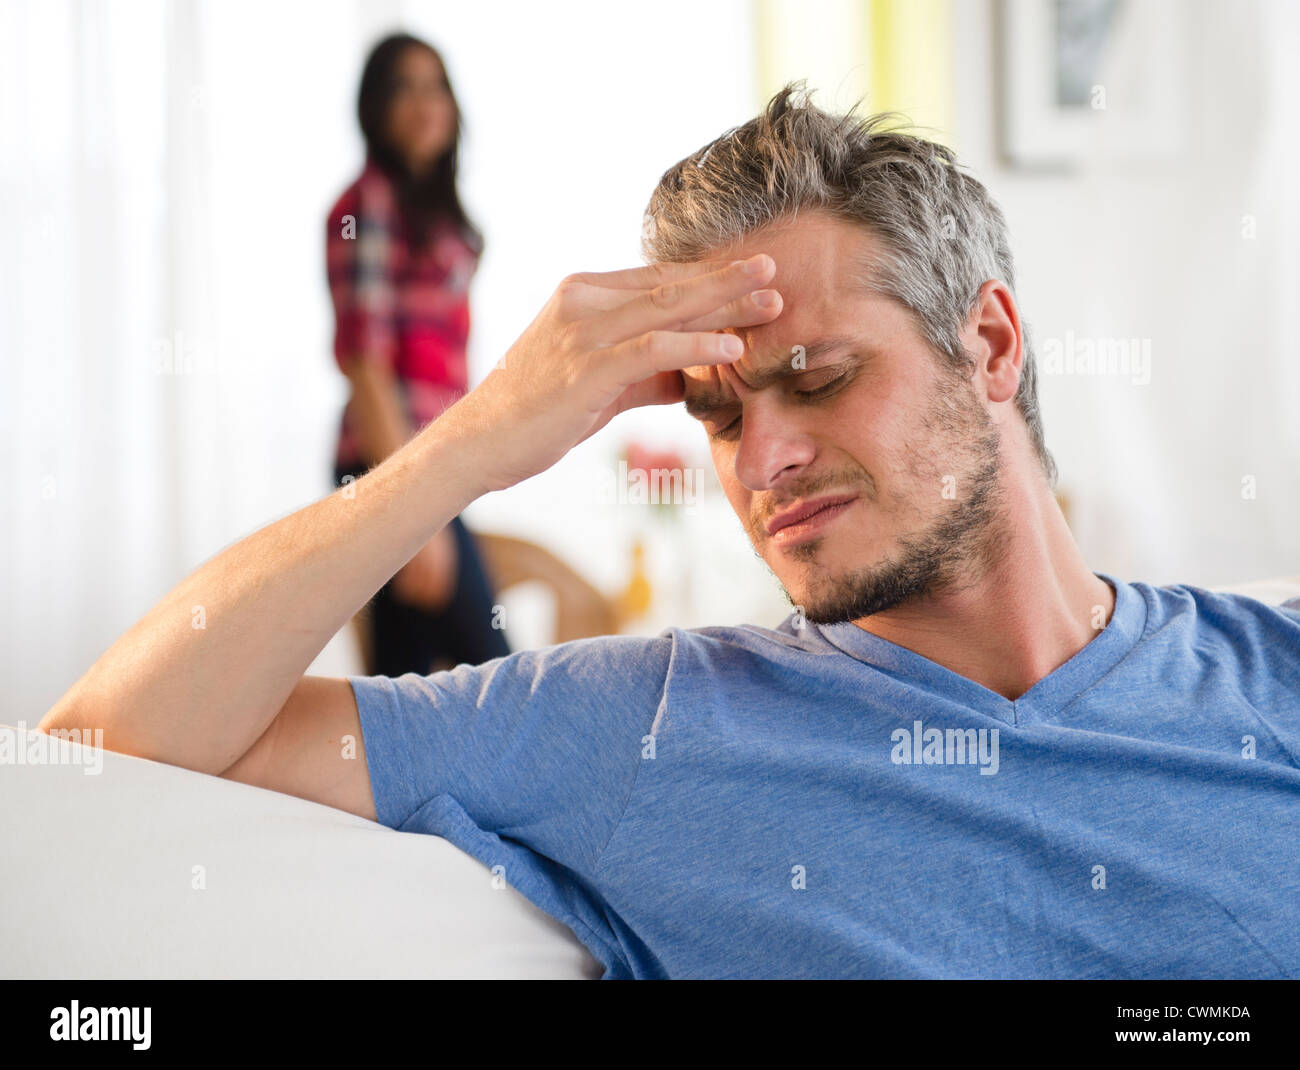 USA, New Jersey, Jersey City, Man touching forehead, woman in background Stock Photo